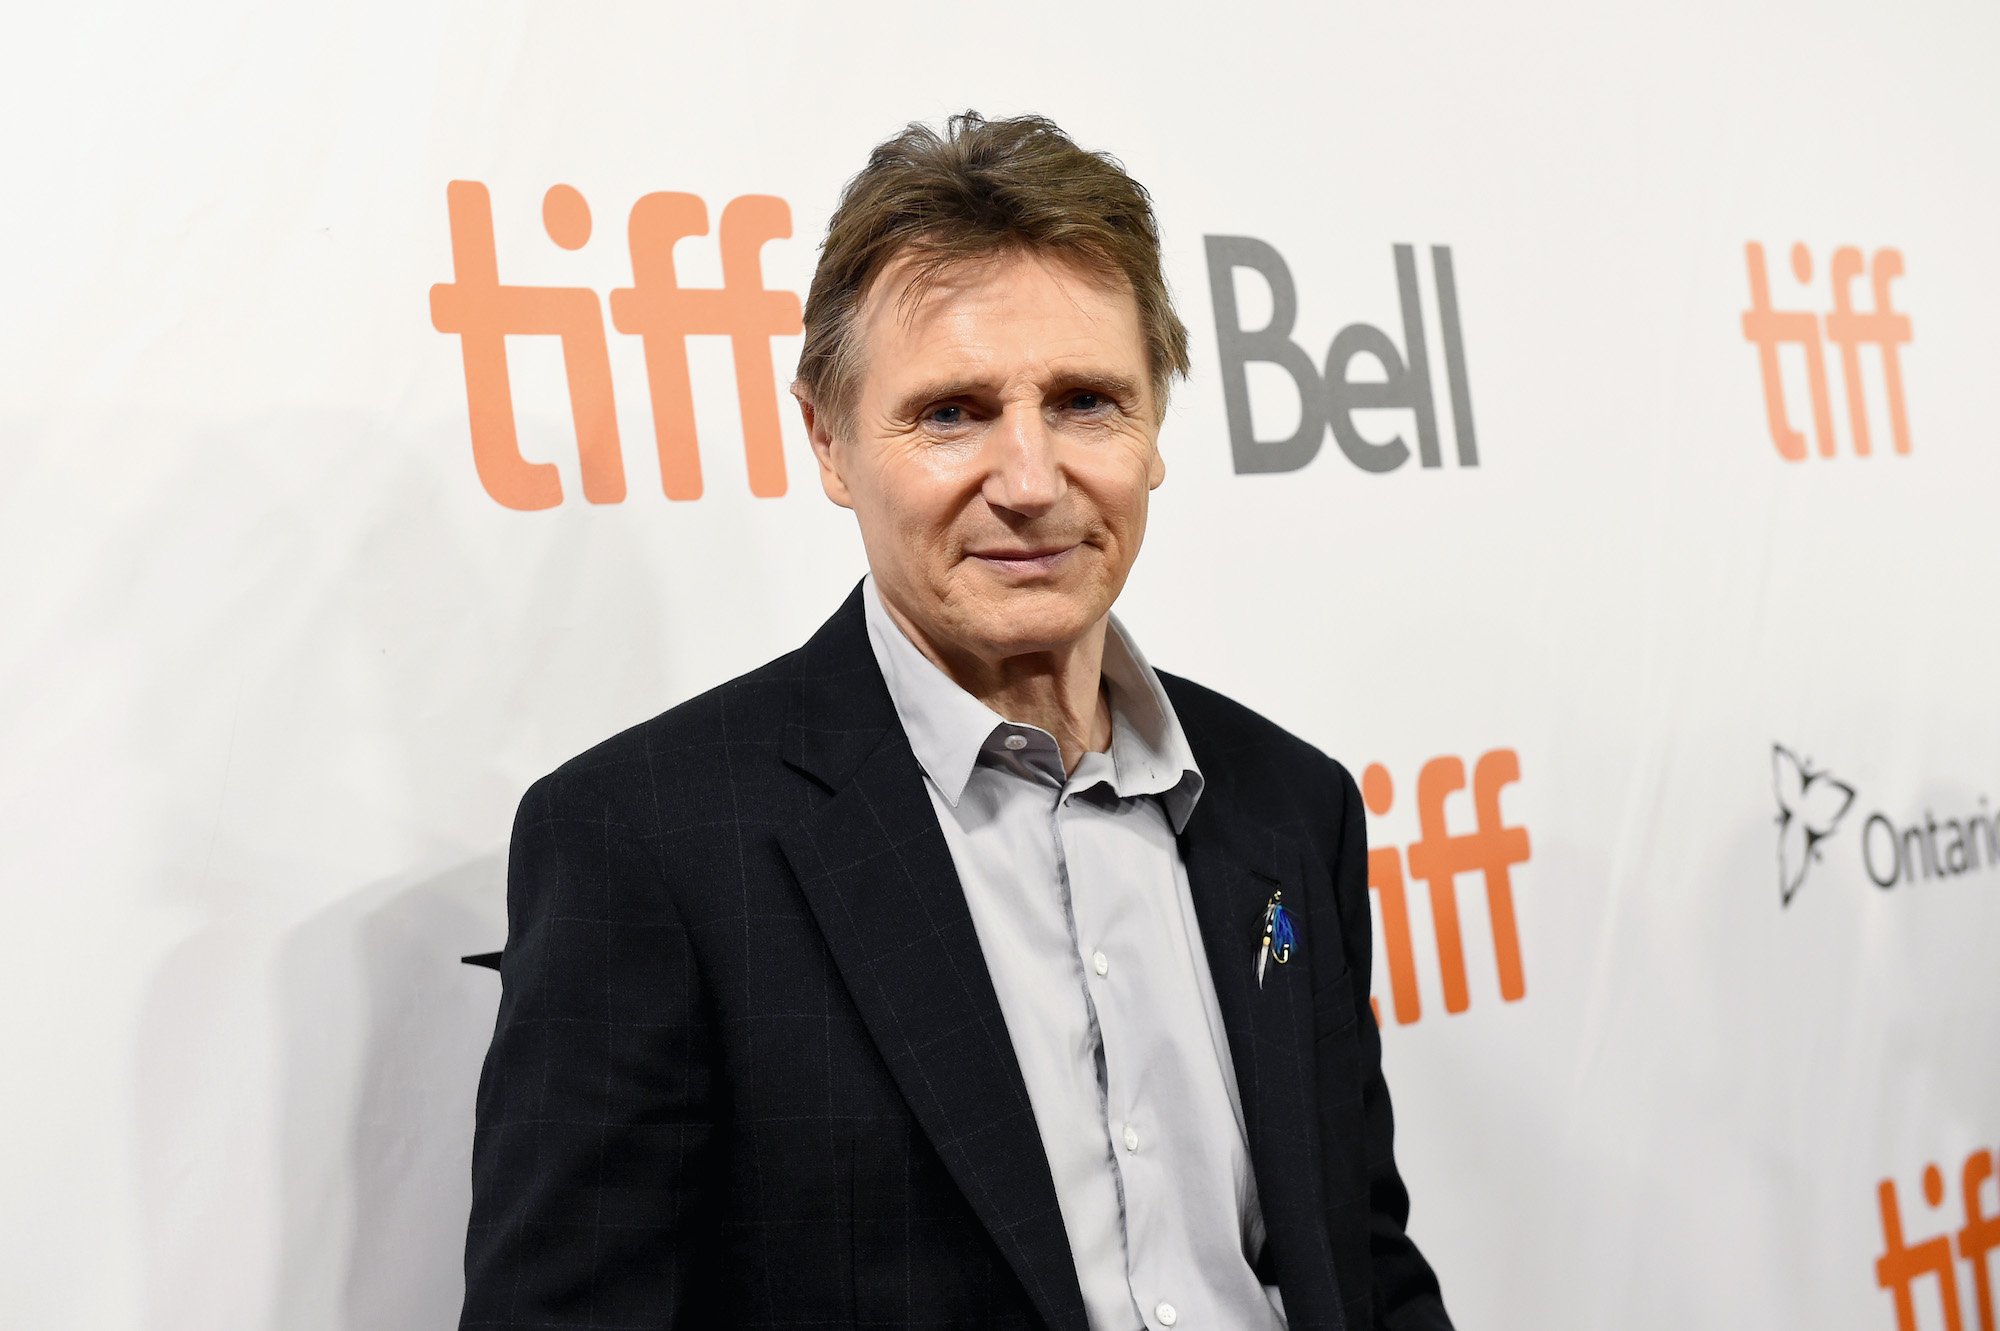 Liam Neeson smiling in front of a white background with repeating logos